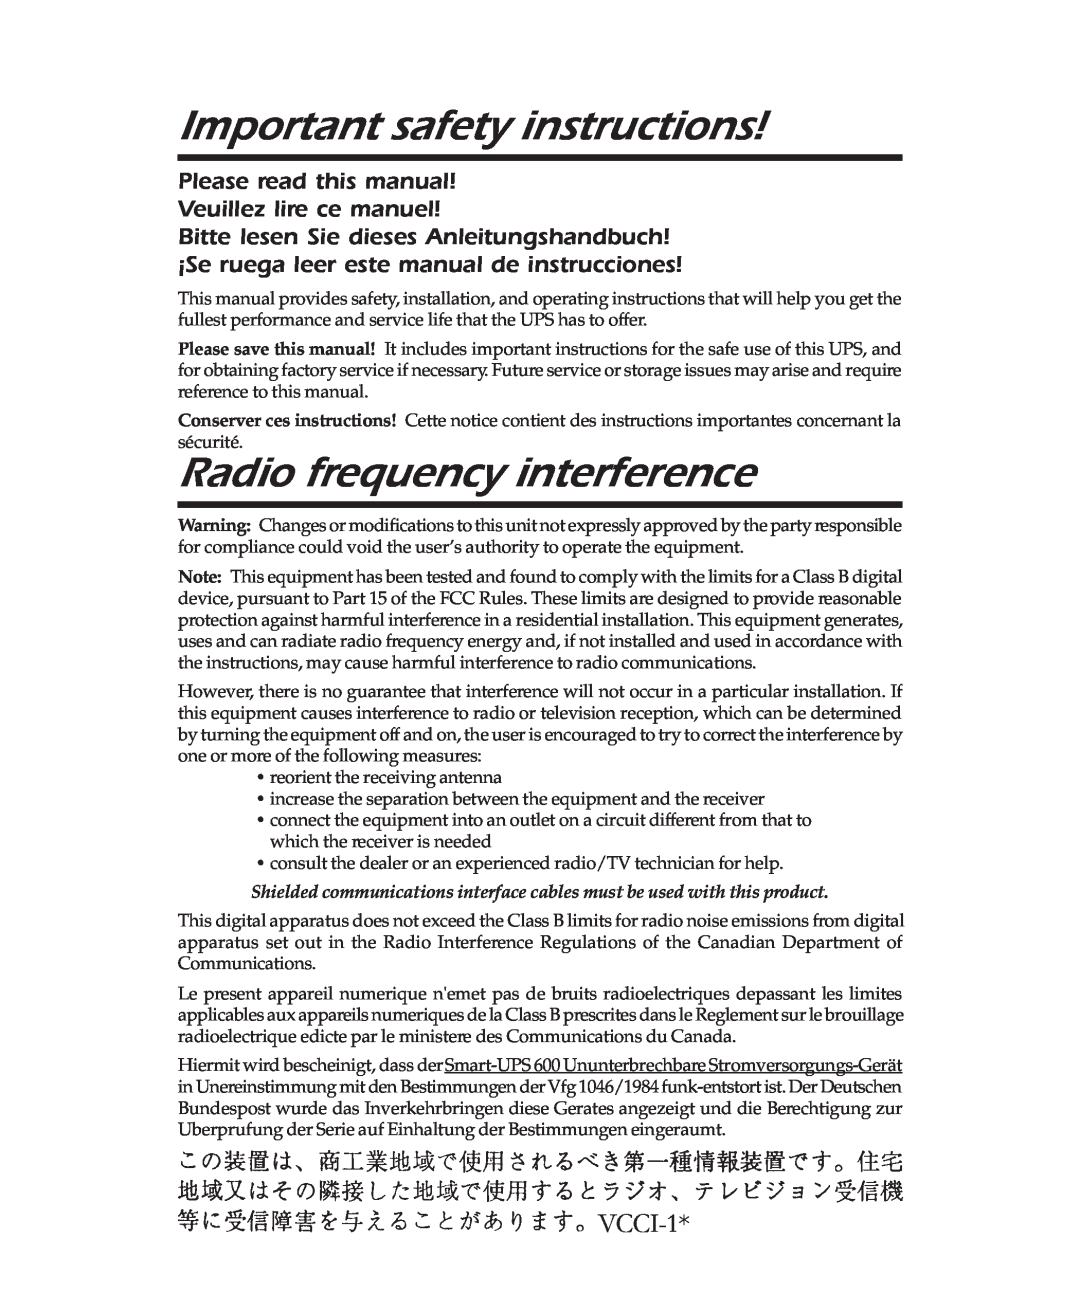 APC 600 user manual Important safety instructions, Radio frequency interference, VCCI-1 